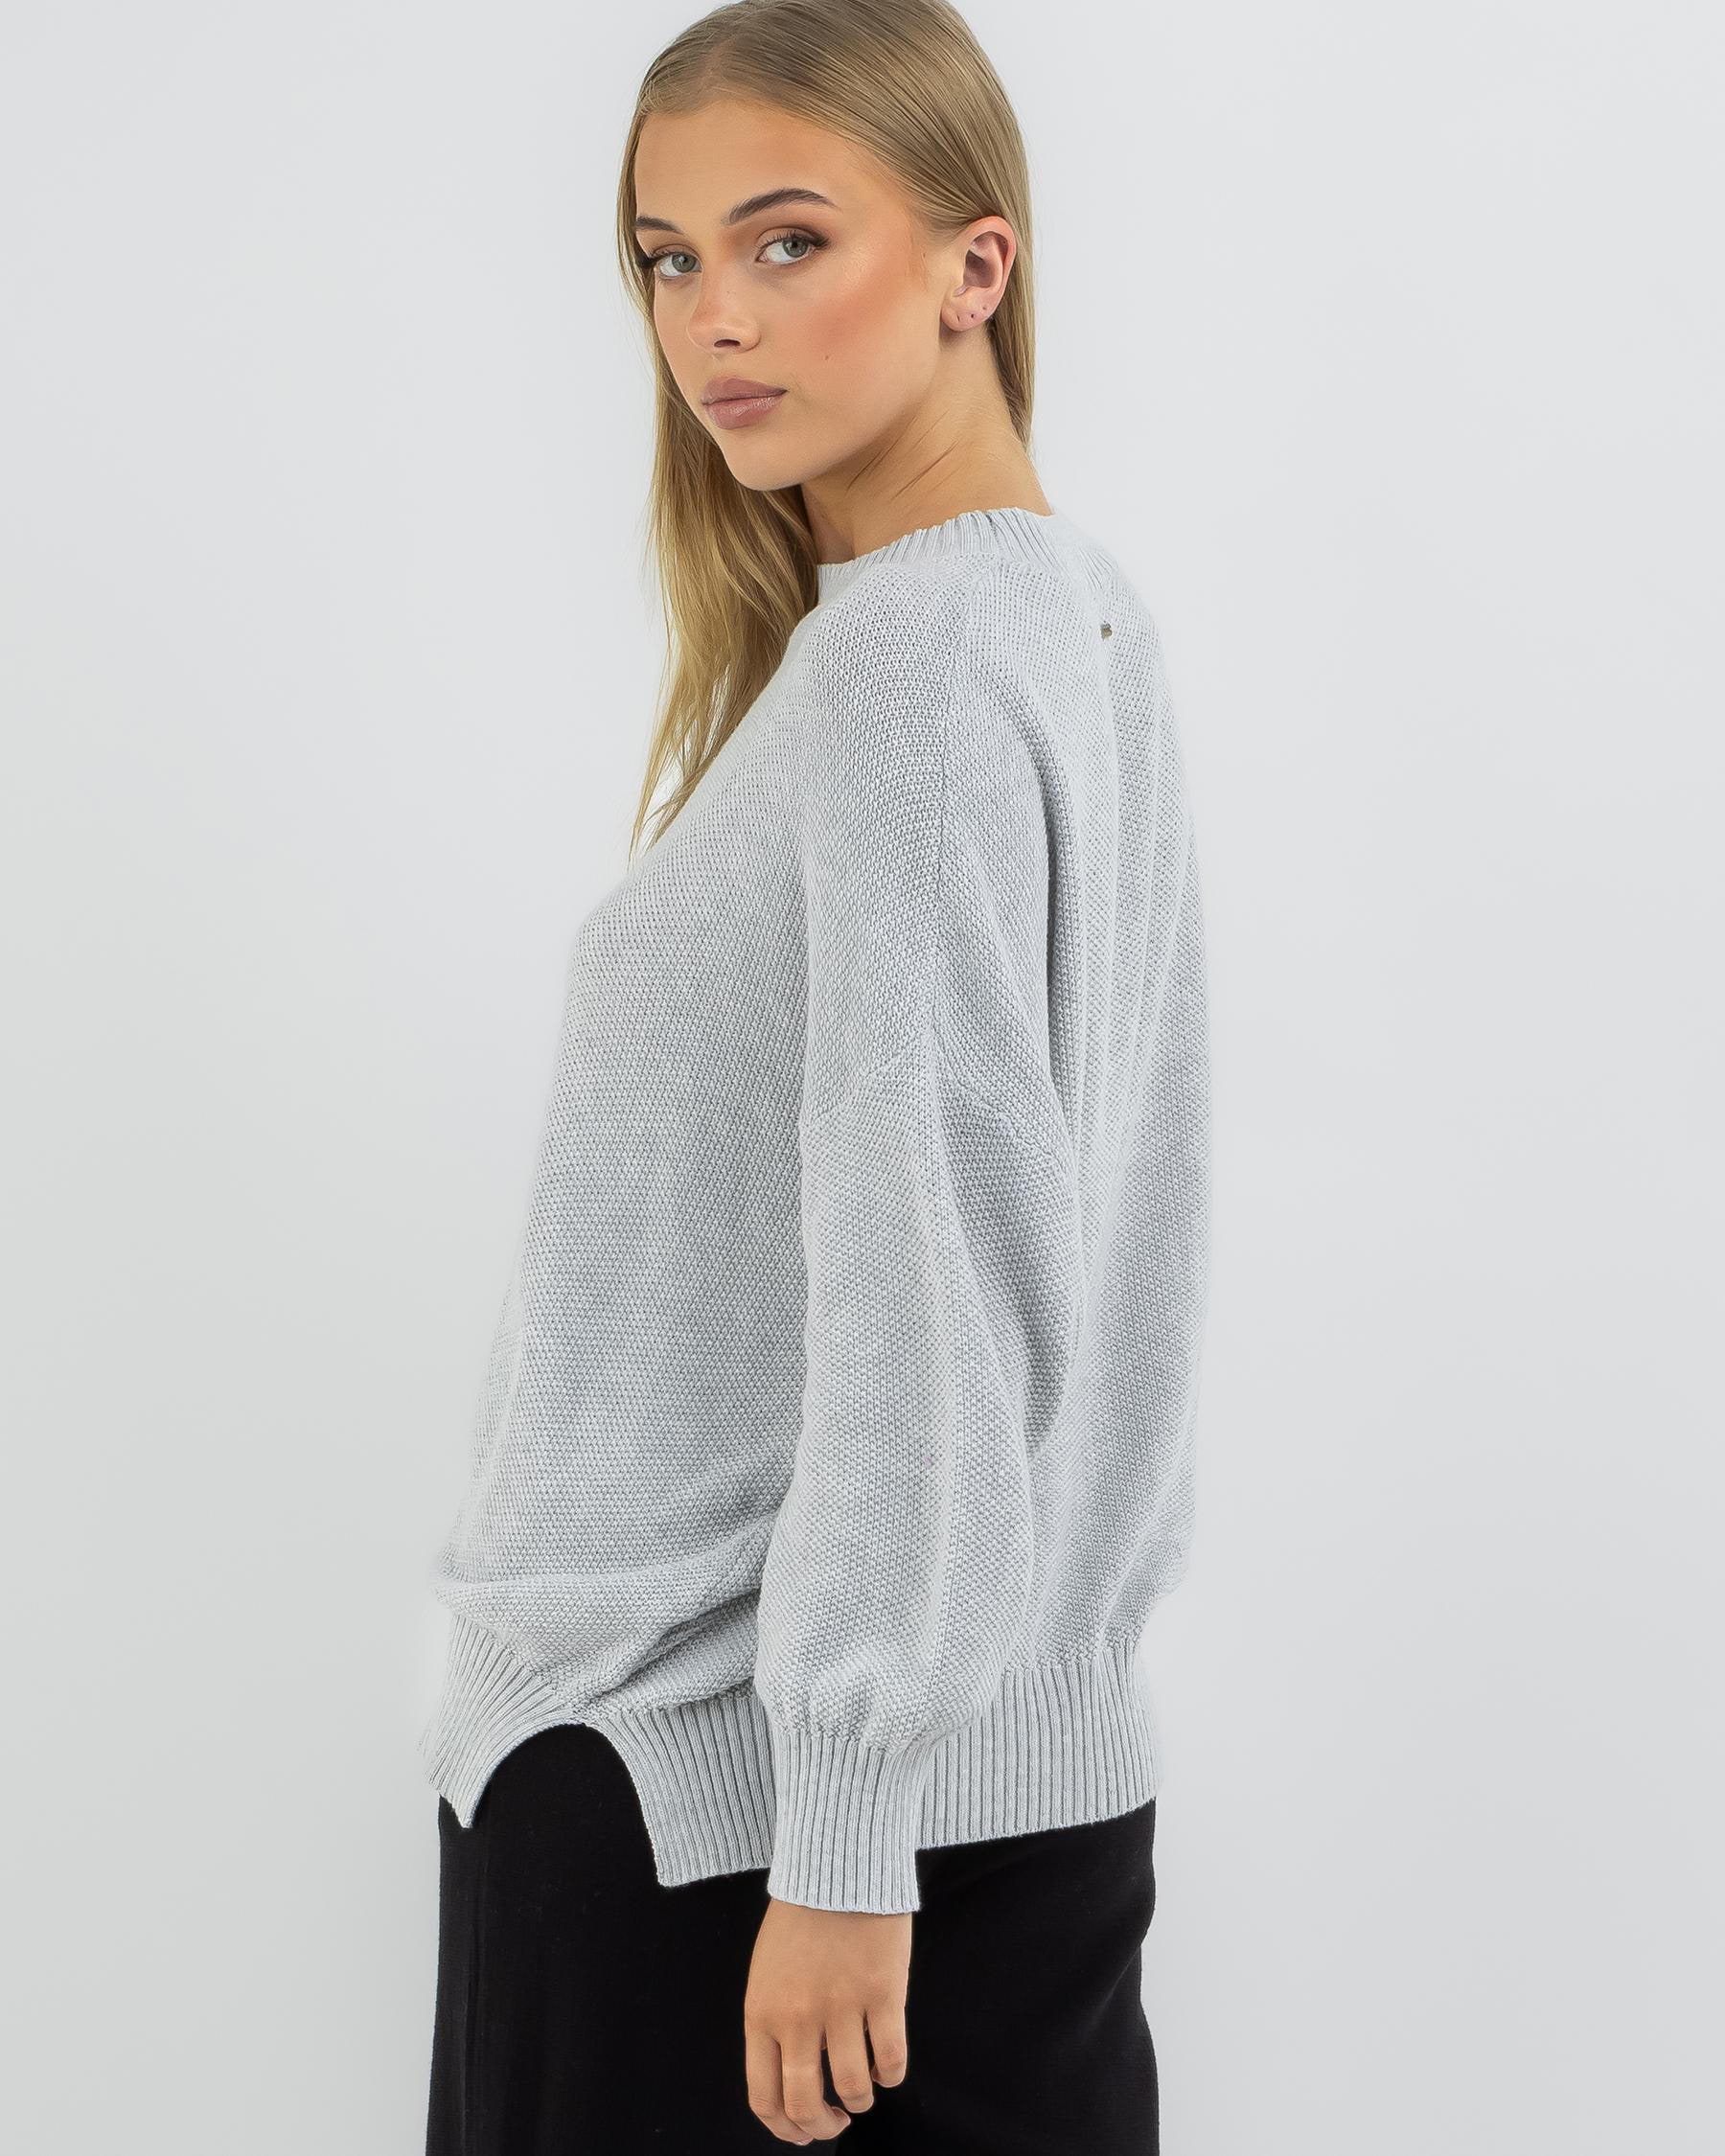 Rip Curl Wander Knit Jumper In Light Grey Heather - FREE* Shipping ...